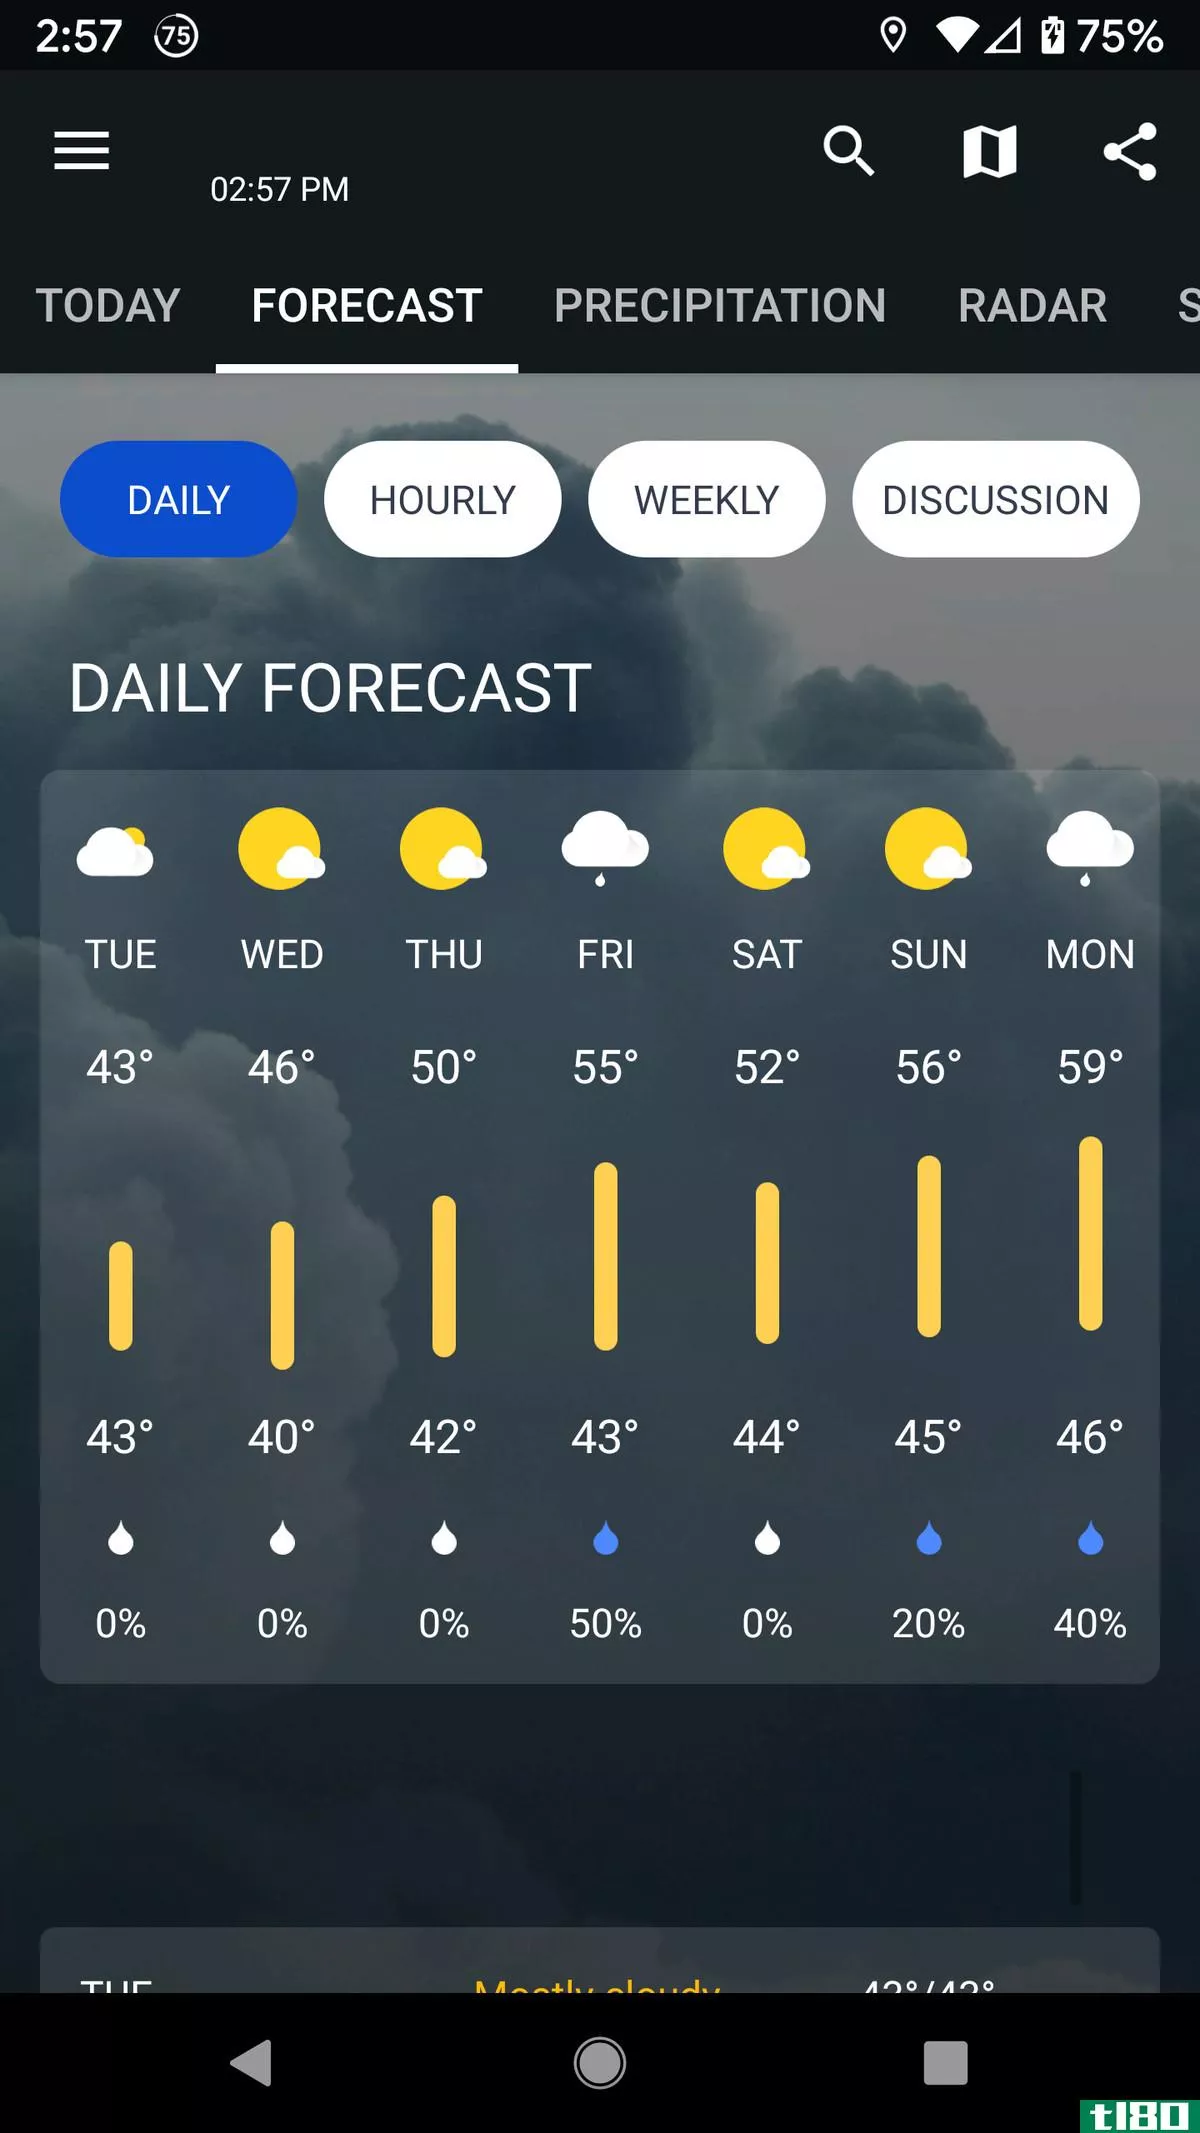 1Weather gets its info using the Weather2020 platform.